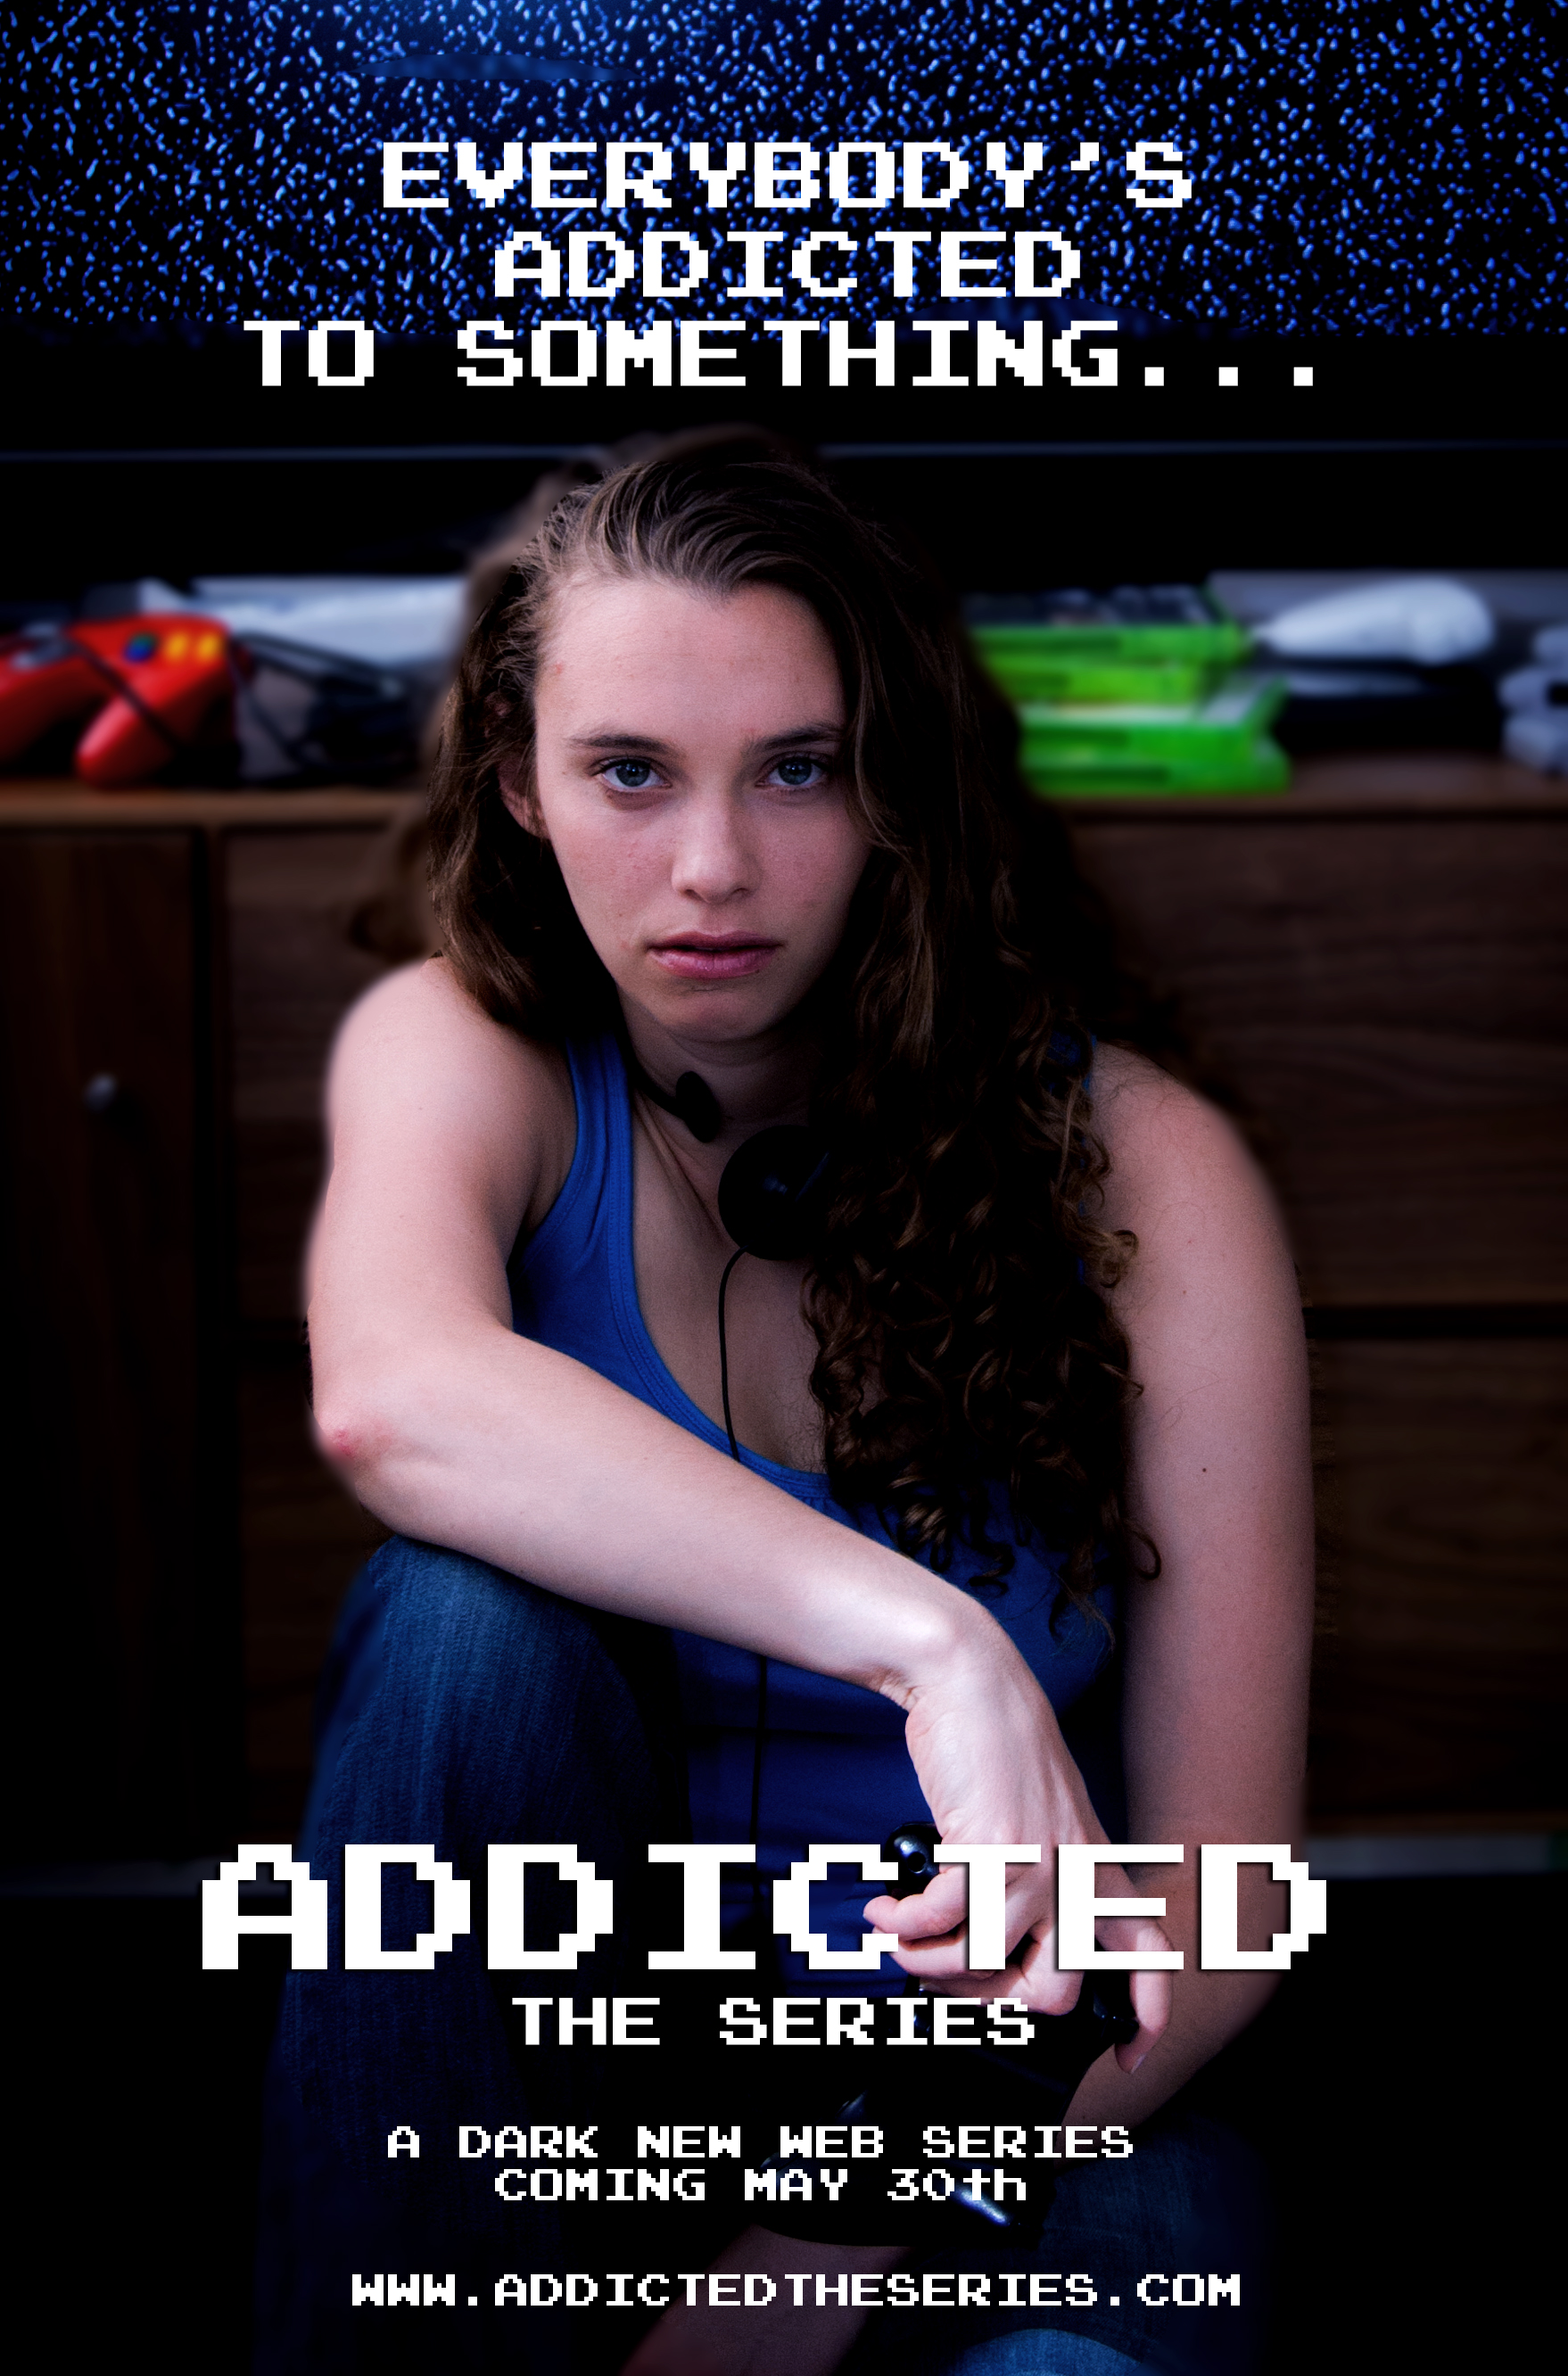 Addicted Poster 1